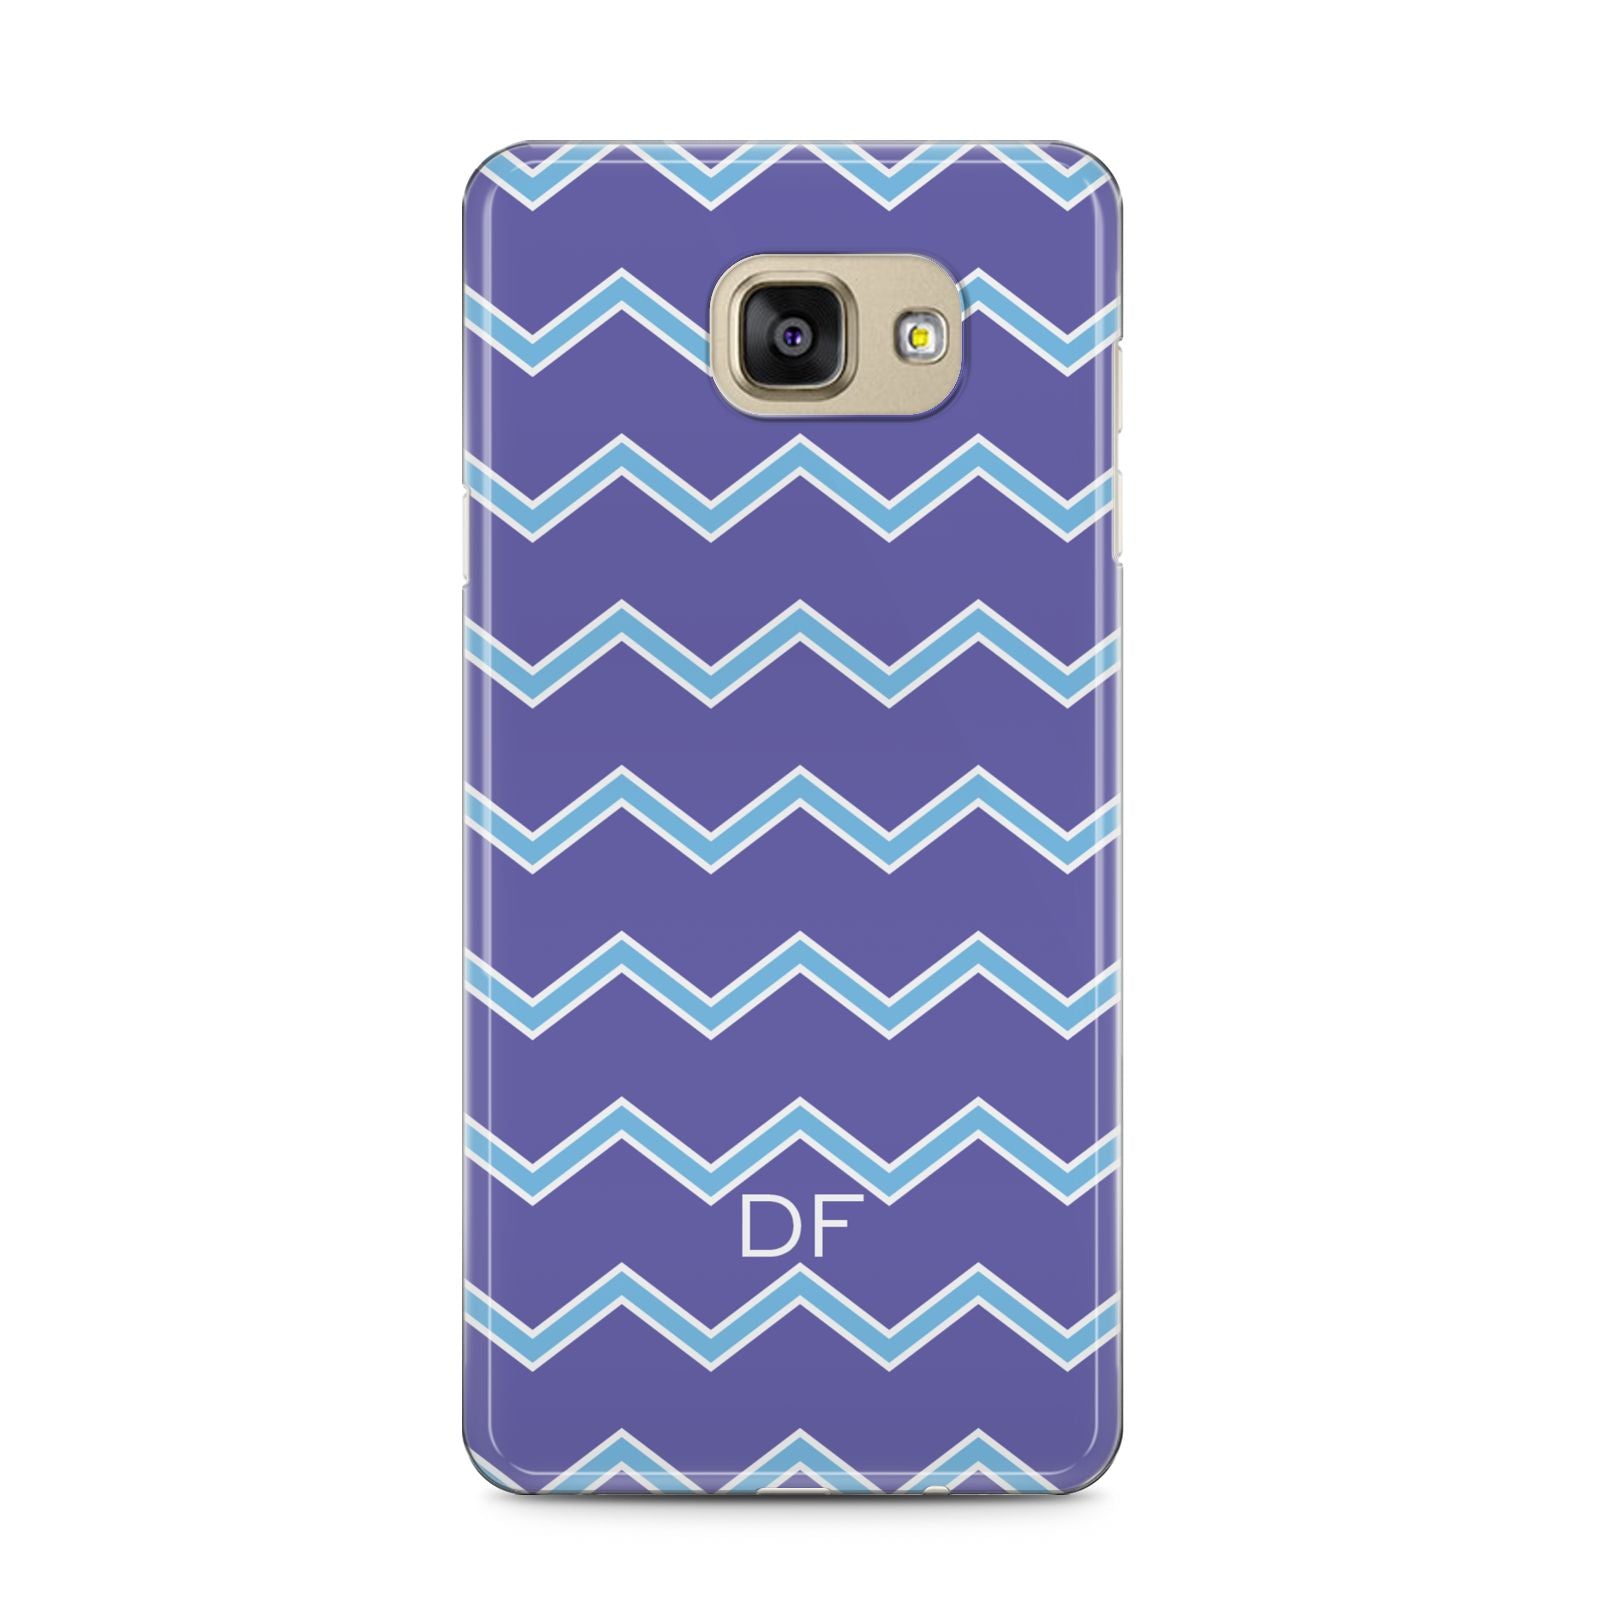 Personalised Chevron 2 Tone Samsung Galaxy A5 2016 Case on gold phone